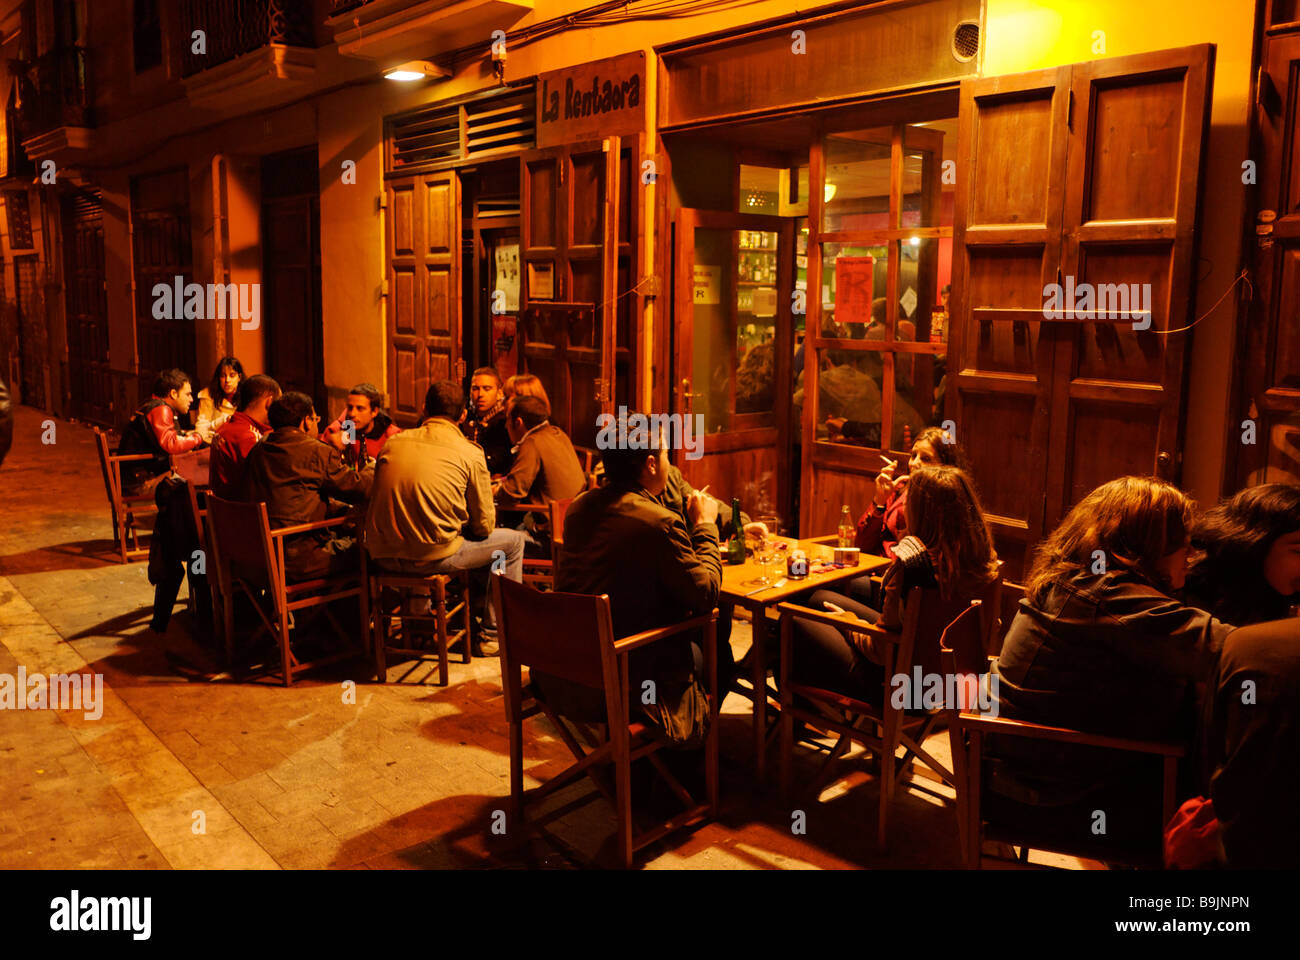 People sitting outside a cafe in El Carmen during las Fallas festival historic city centre of Valencia Spain Stock Photo